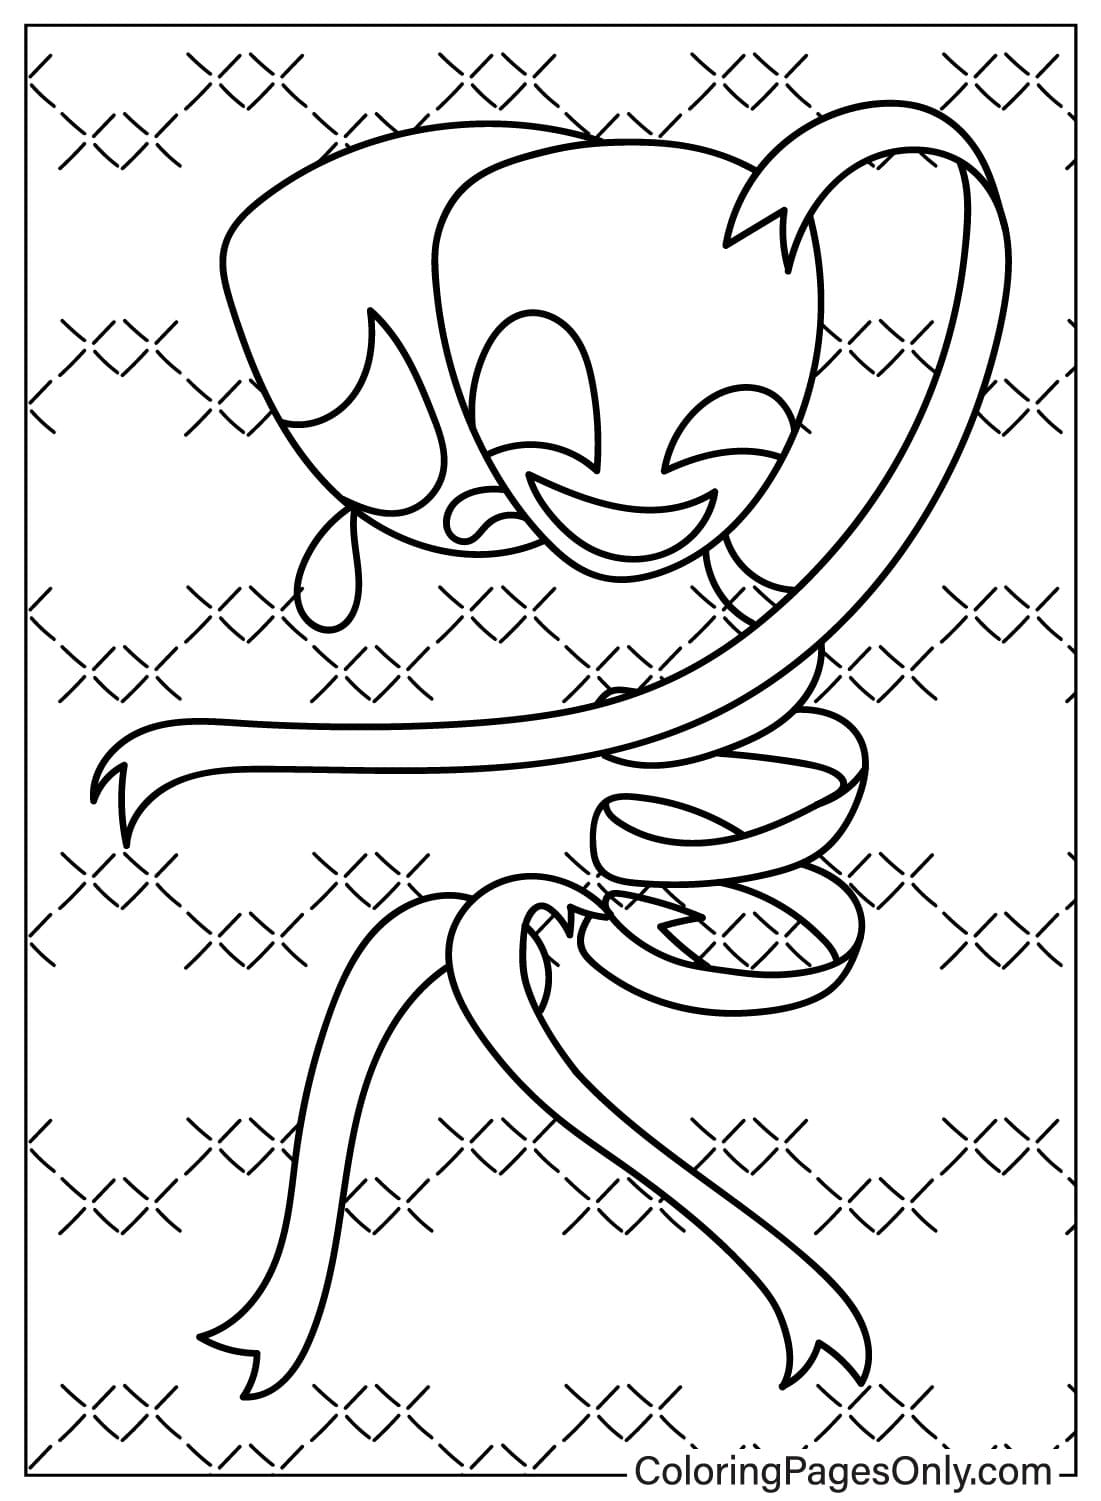 Pictures Gangle Coloring Page from Gangle